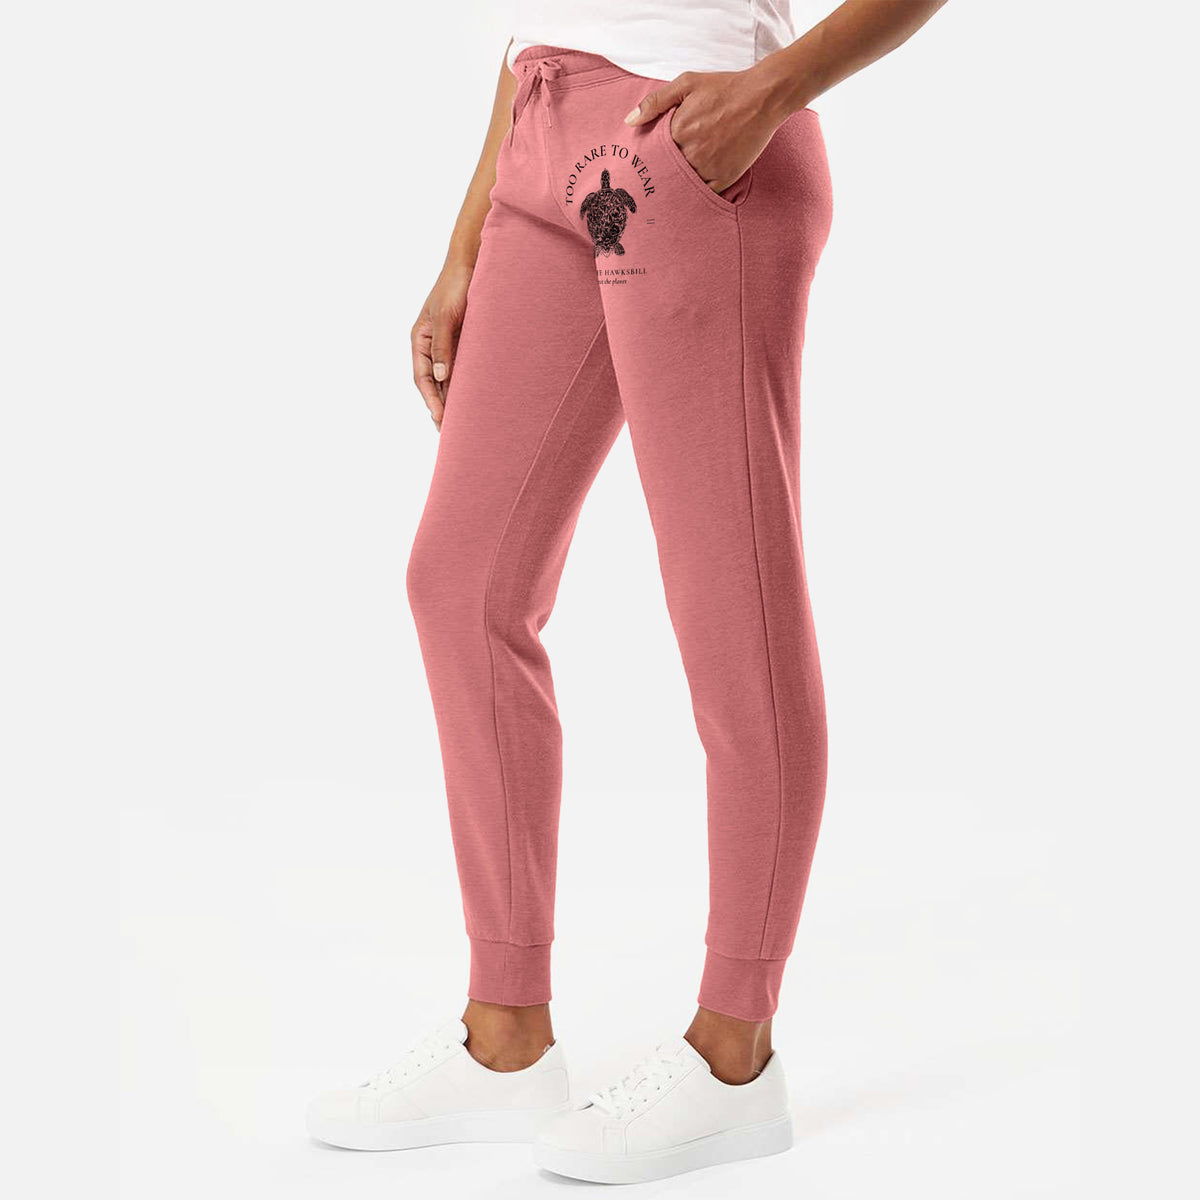 Too Rare to Wear - Save the Hawksbill - Women&#39;s Cali Wave Jogger Sweatpants